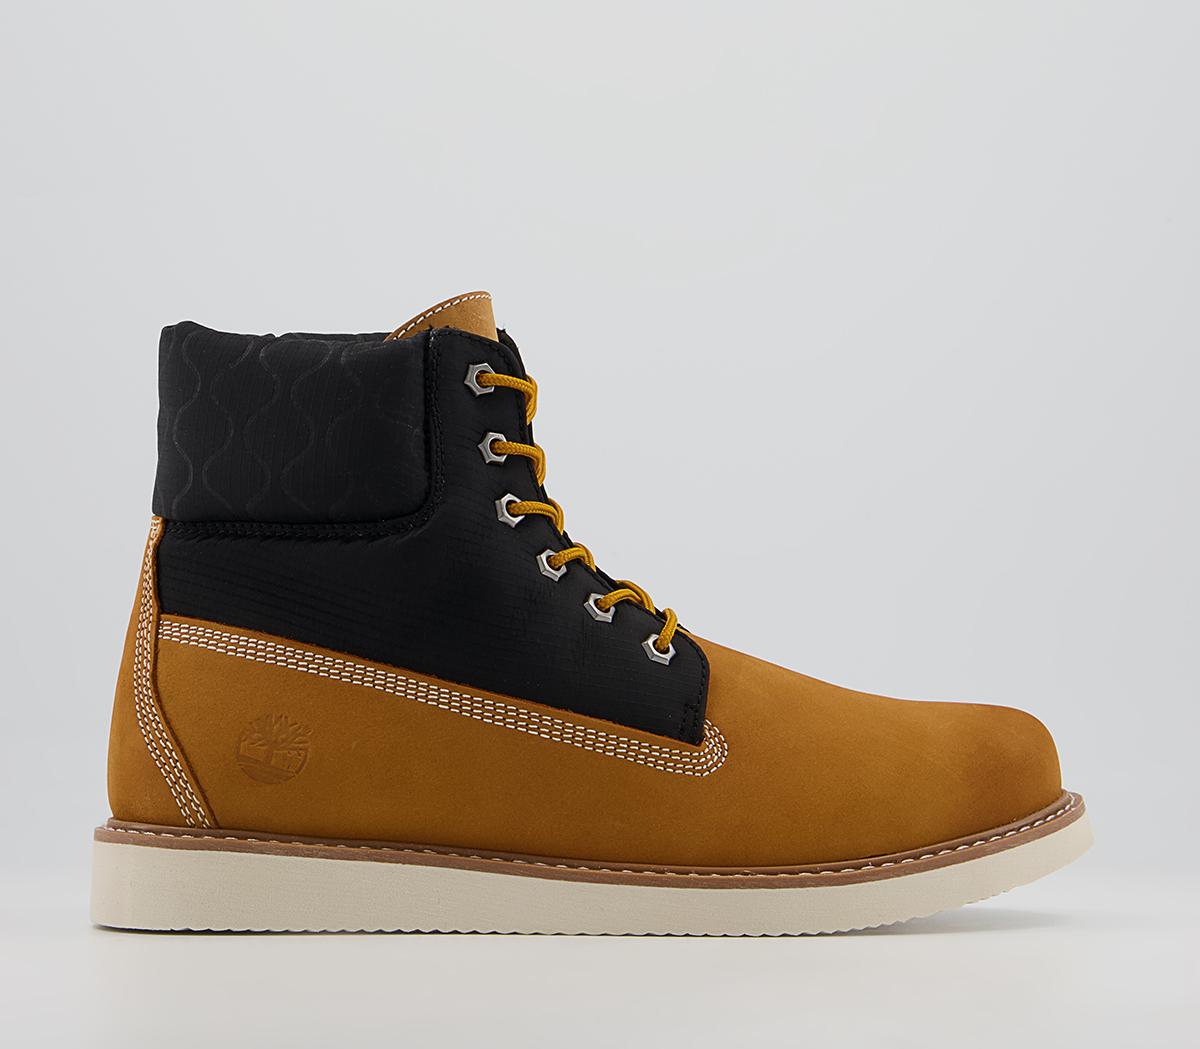 Timberland Newmarket II Quilted Boots Wheat Nubuck - Men's Boots